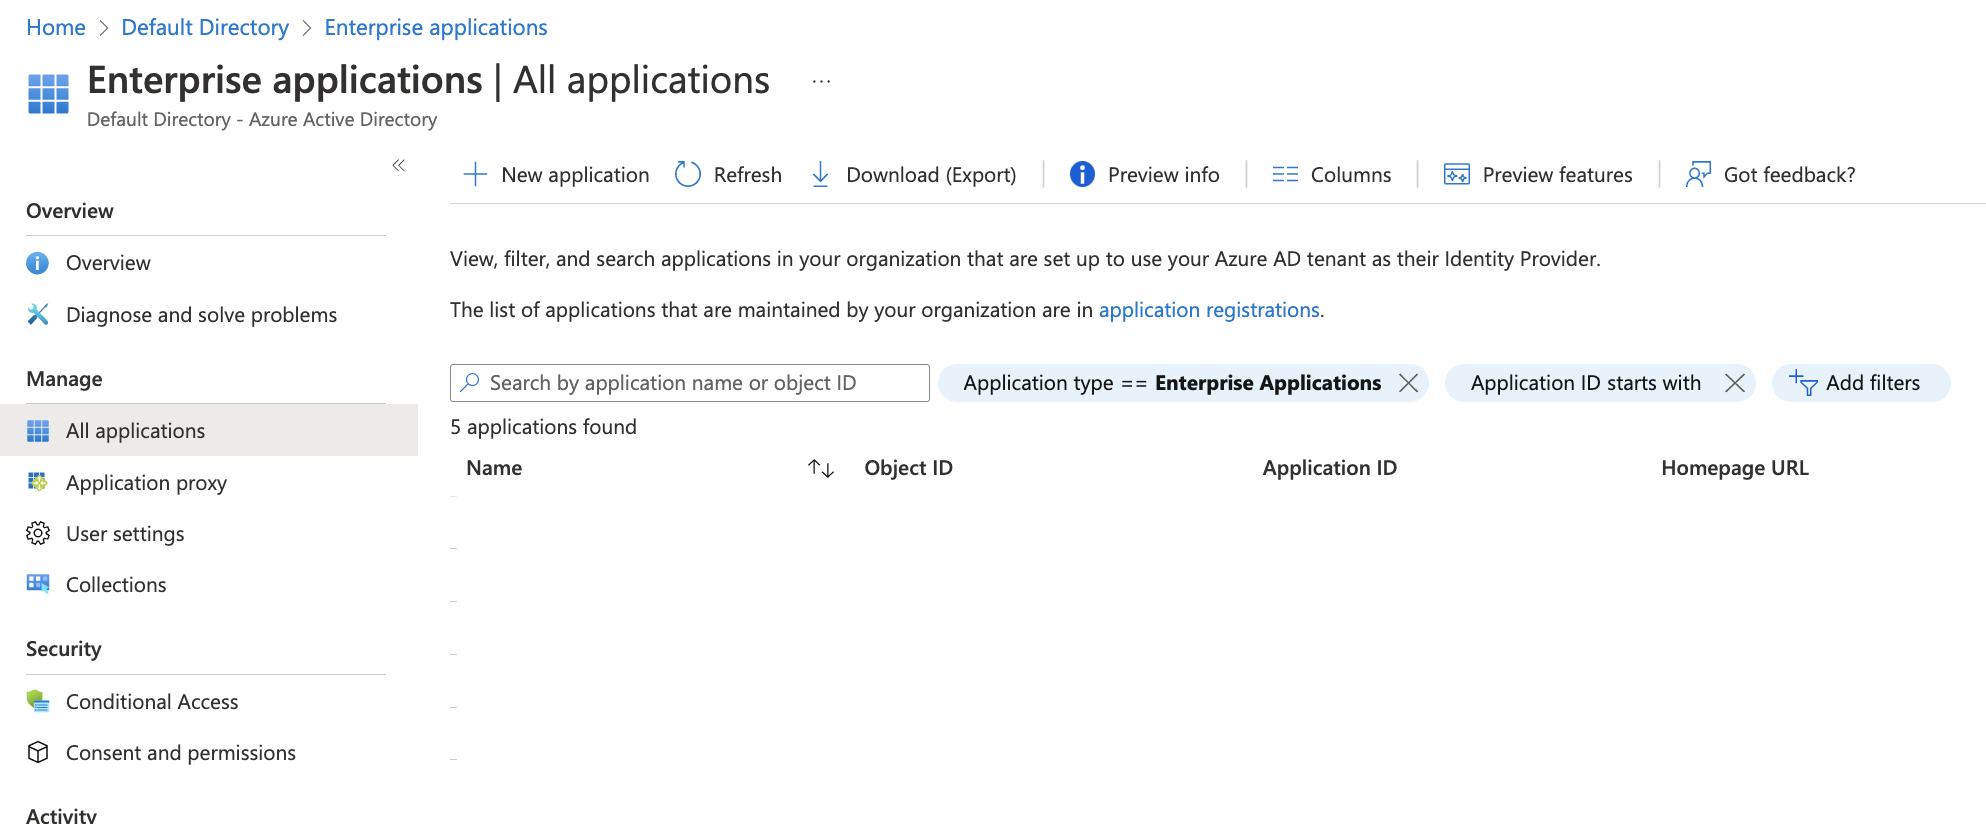 New application button from the Enterprise Application page in Azure